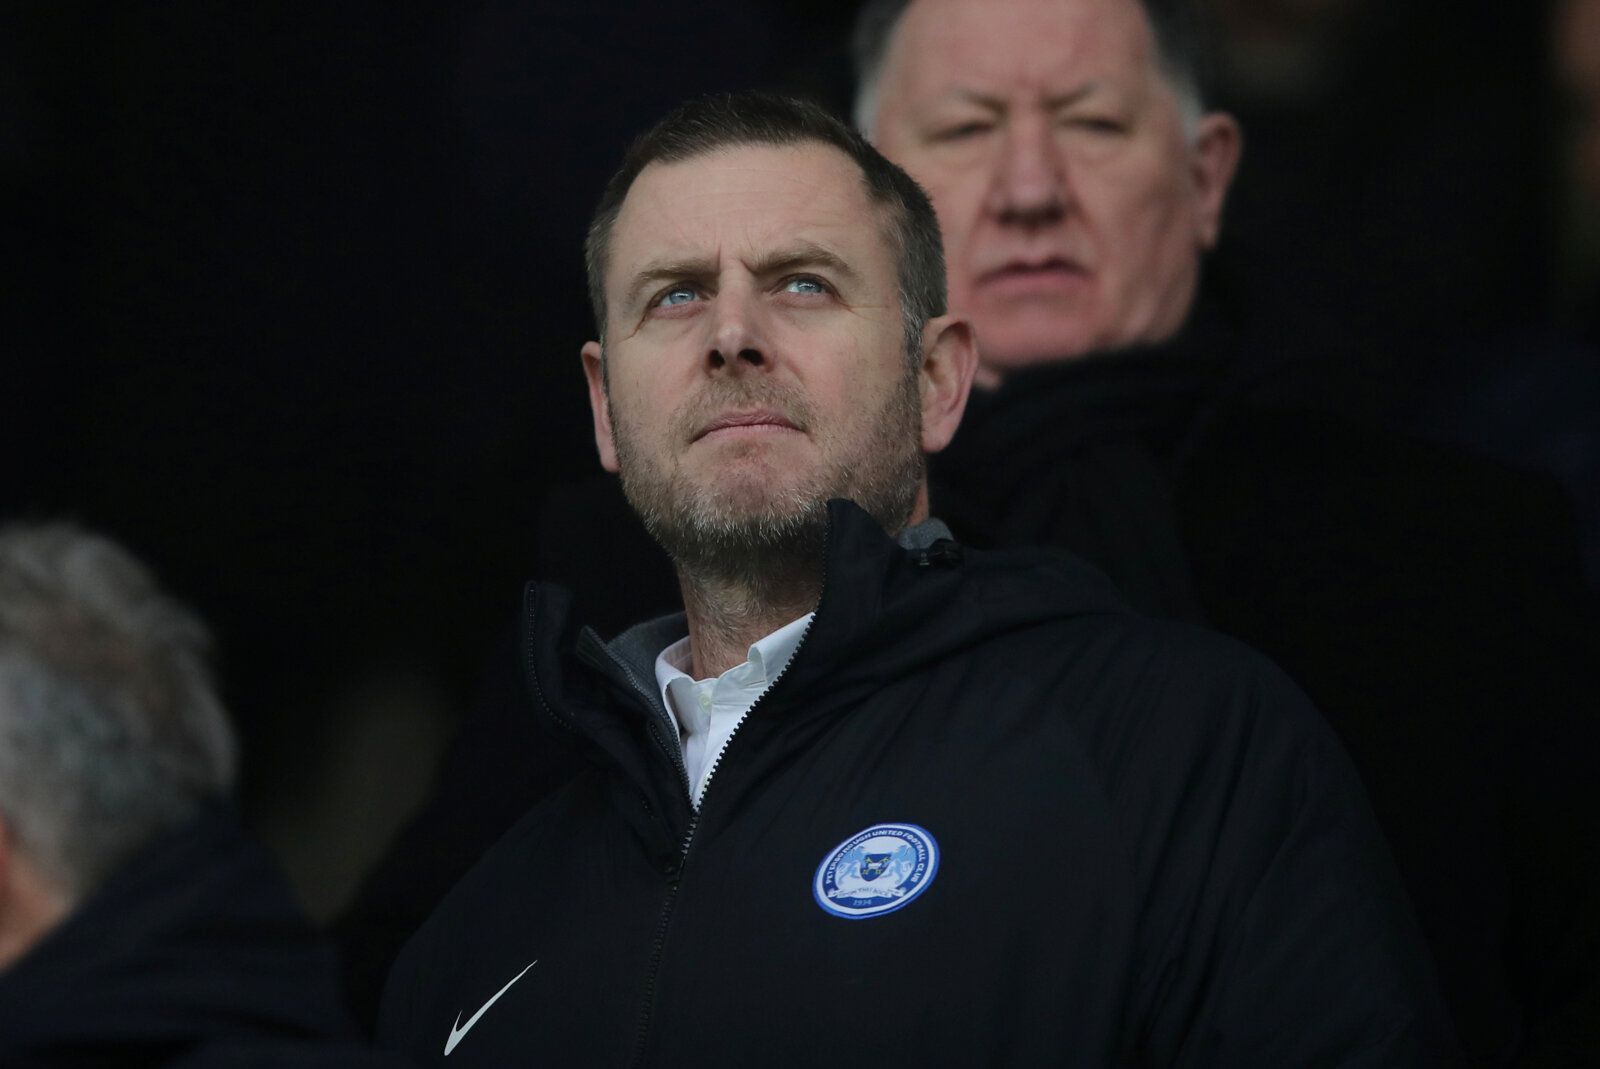 Soccer Football - FA Cup - Third Round - Burnley v Peterborough United - Turf Moor, Burnley, Britain - January 4, 2020  Peterborough United chairman Darragh MacAnthony before the match  Action Images via Reuters/Molly Darlington